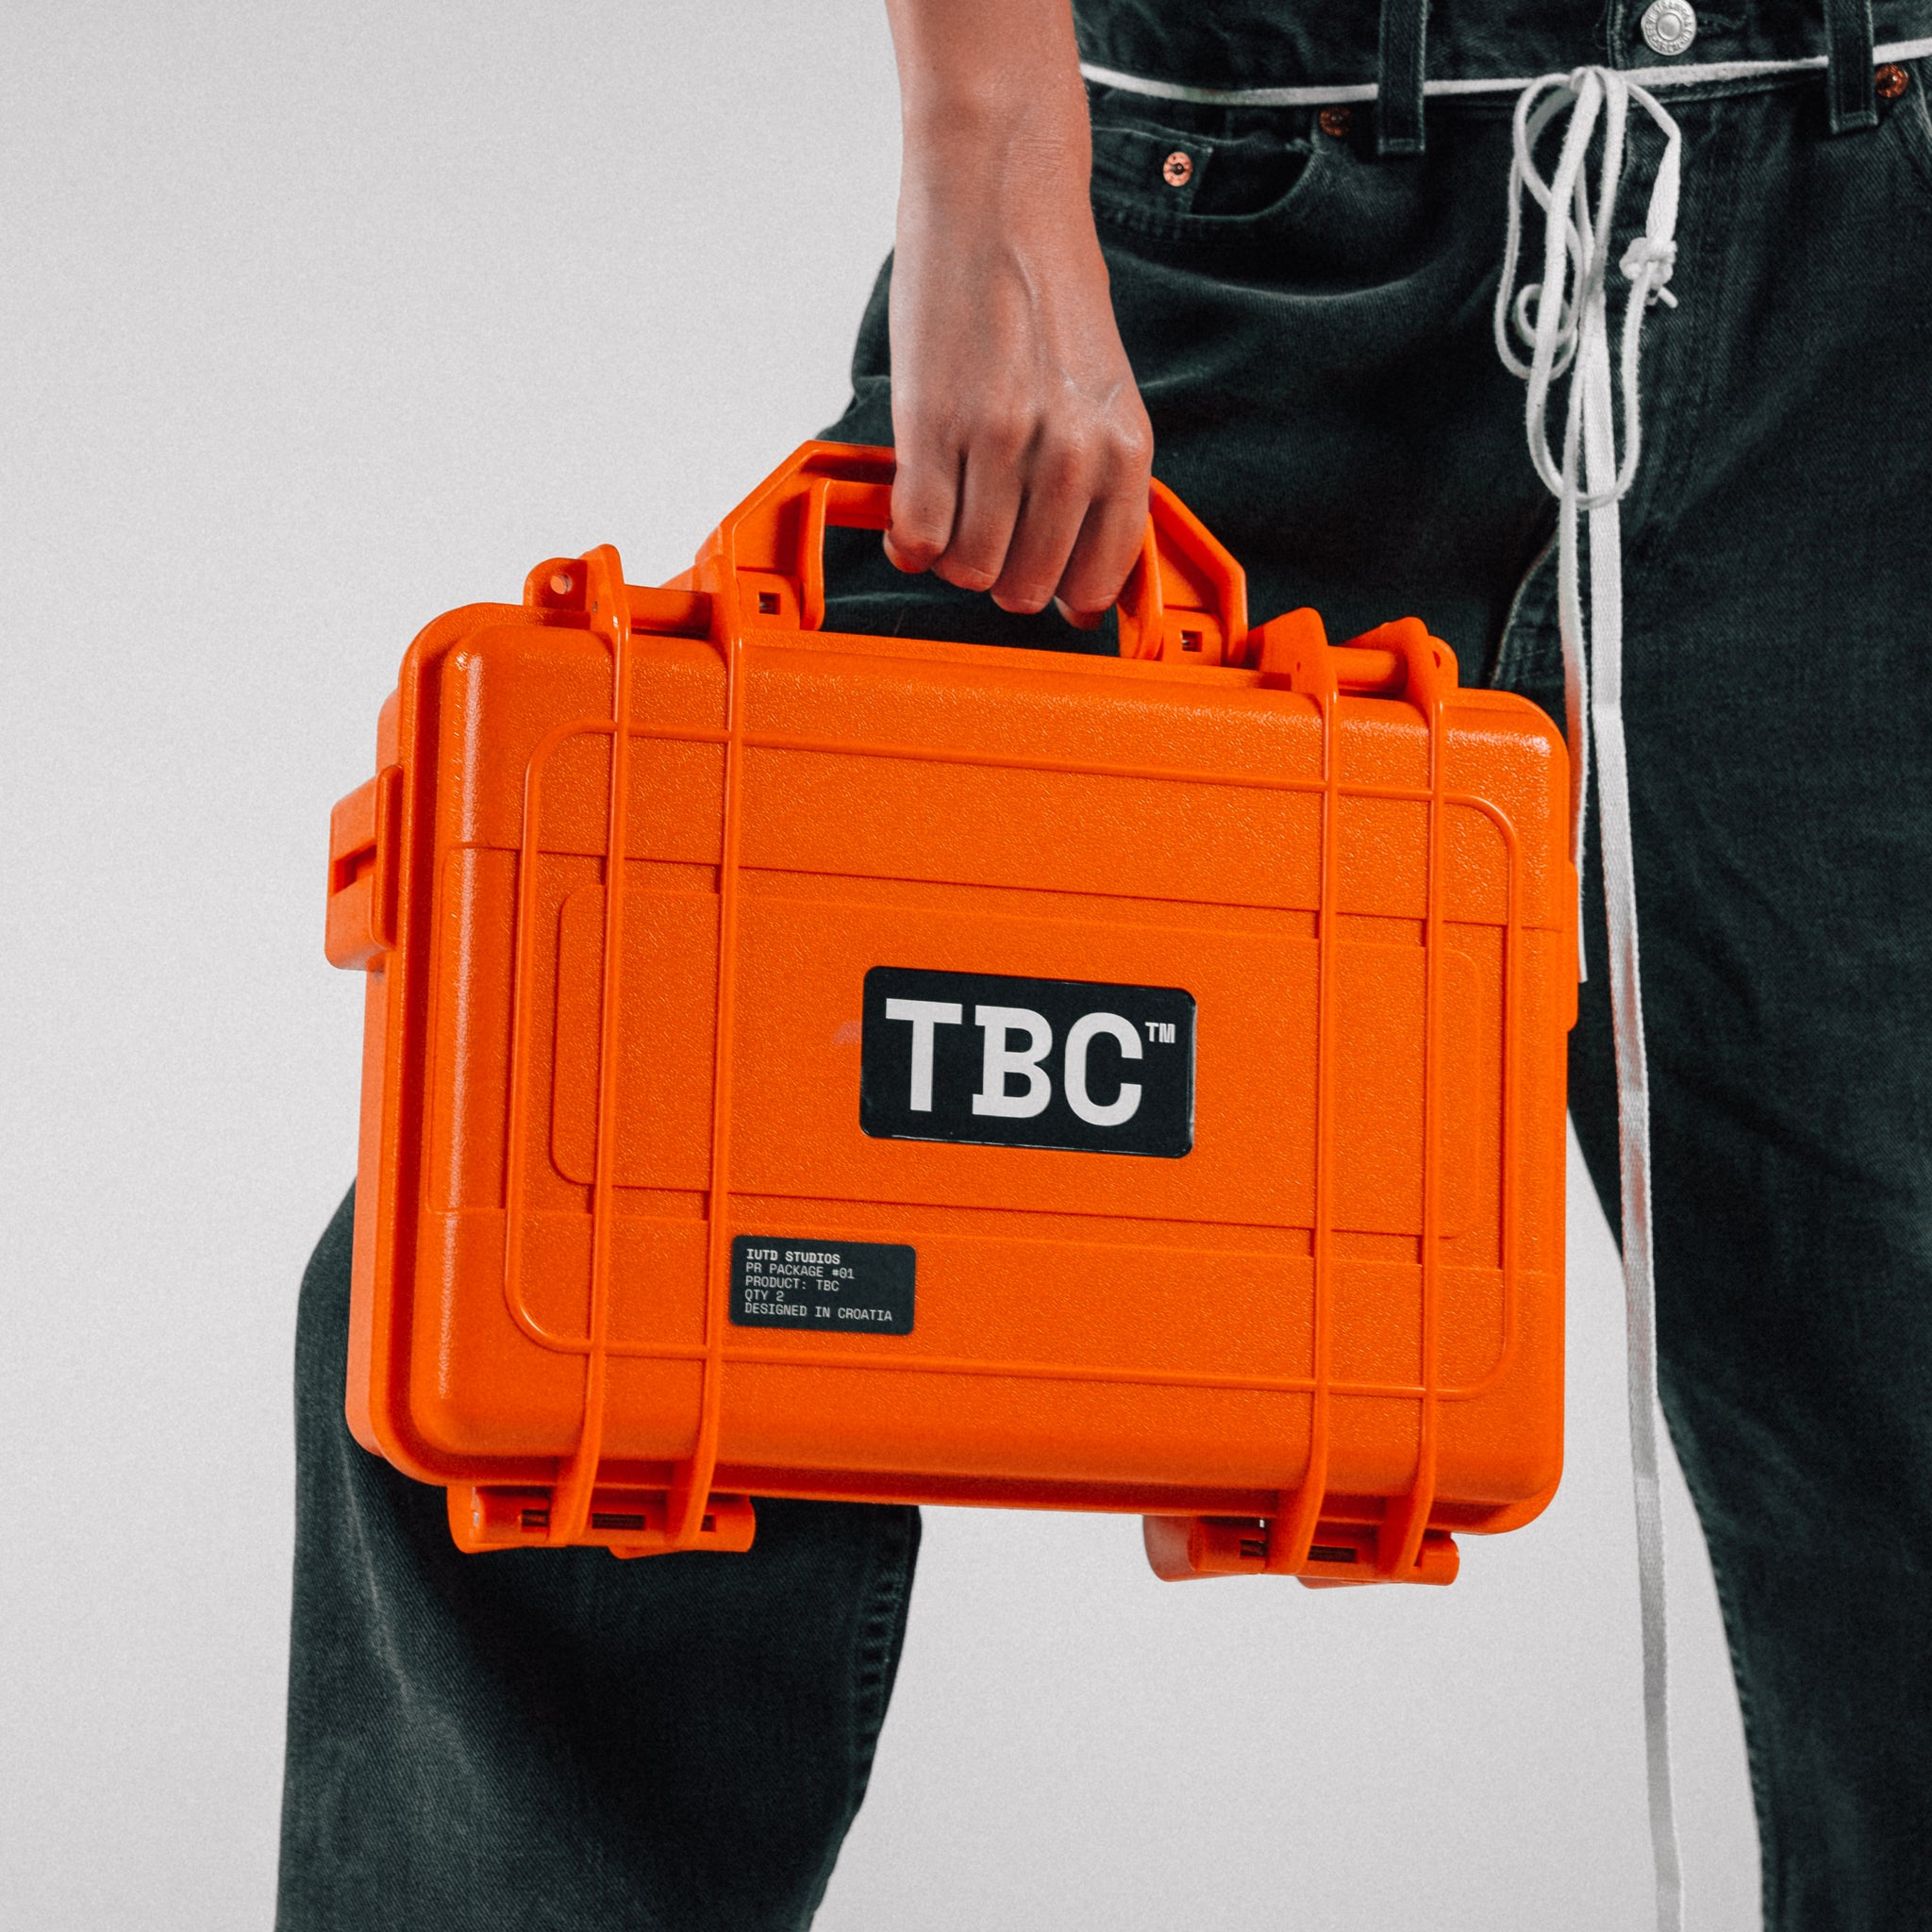 TBC (To Be Continued) Film Kit